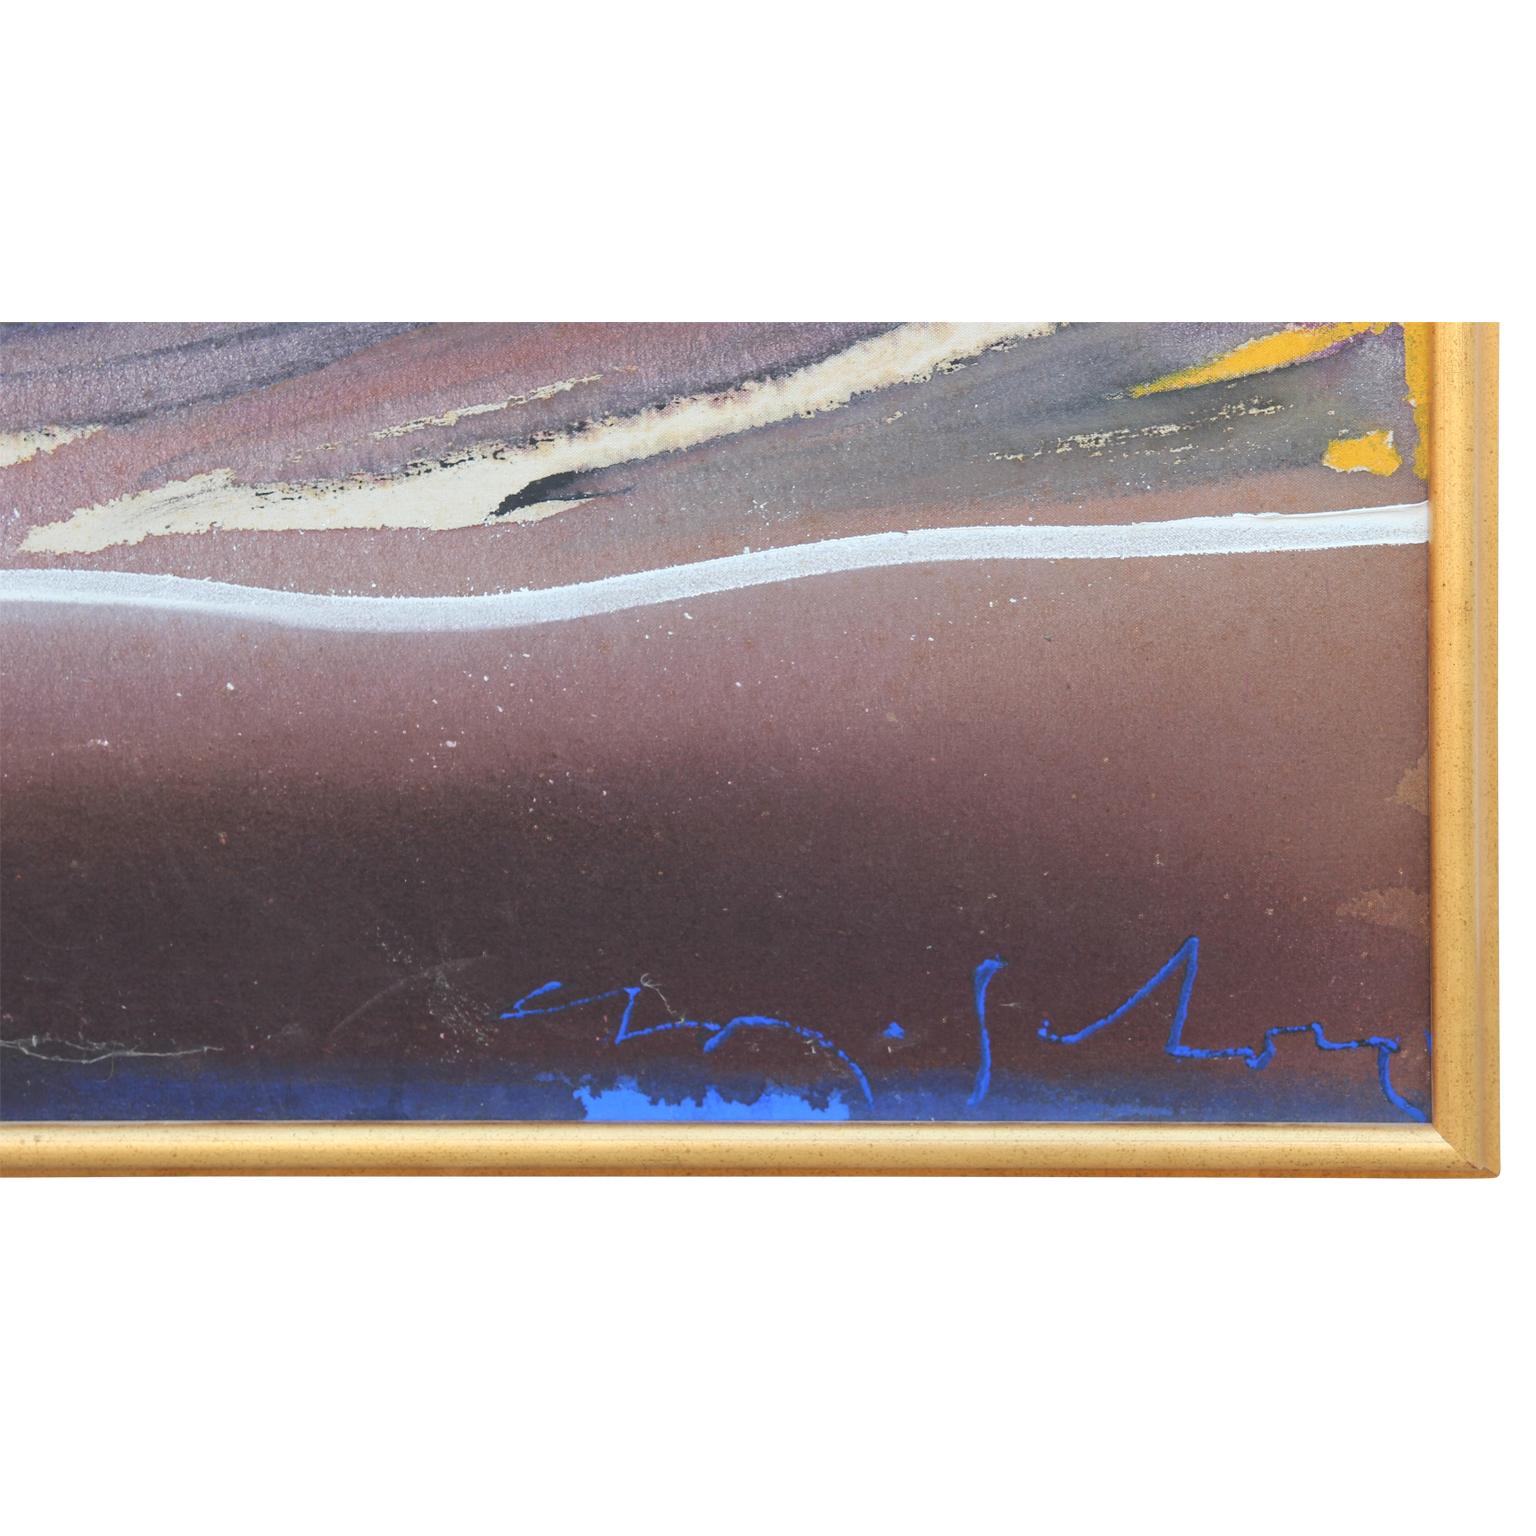 Jewel-tone abstract color field painting that appears to be a landscape. The work is signed by the artist in the bottom right corner and displayed in a beautiful golden frame. 

Dimensions Without Frame: H 36 in. x W 48 in. 

Artist Biography: